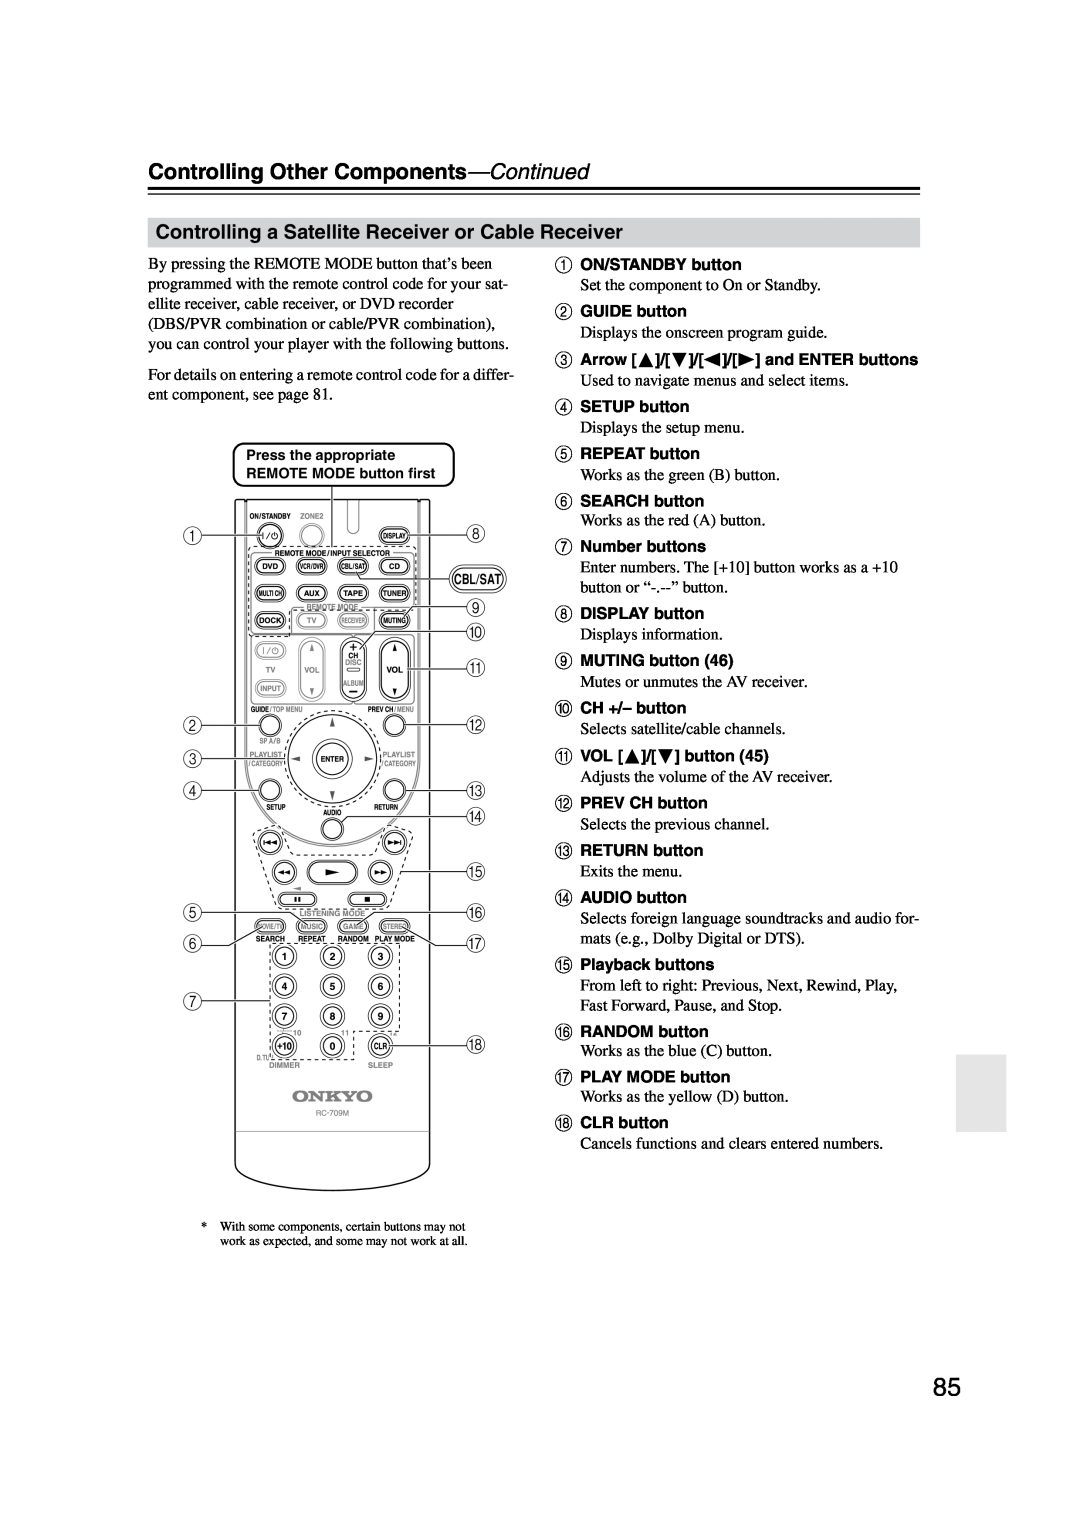 Onkyo TX-SR576, TX-SR506 instruction manual Controlling Other Components—Continued 